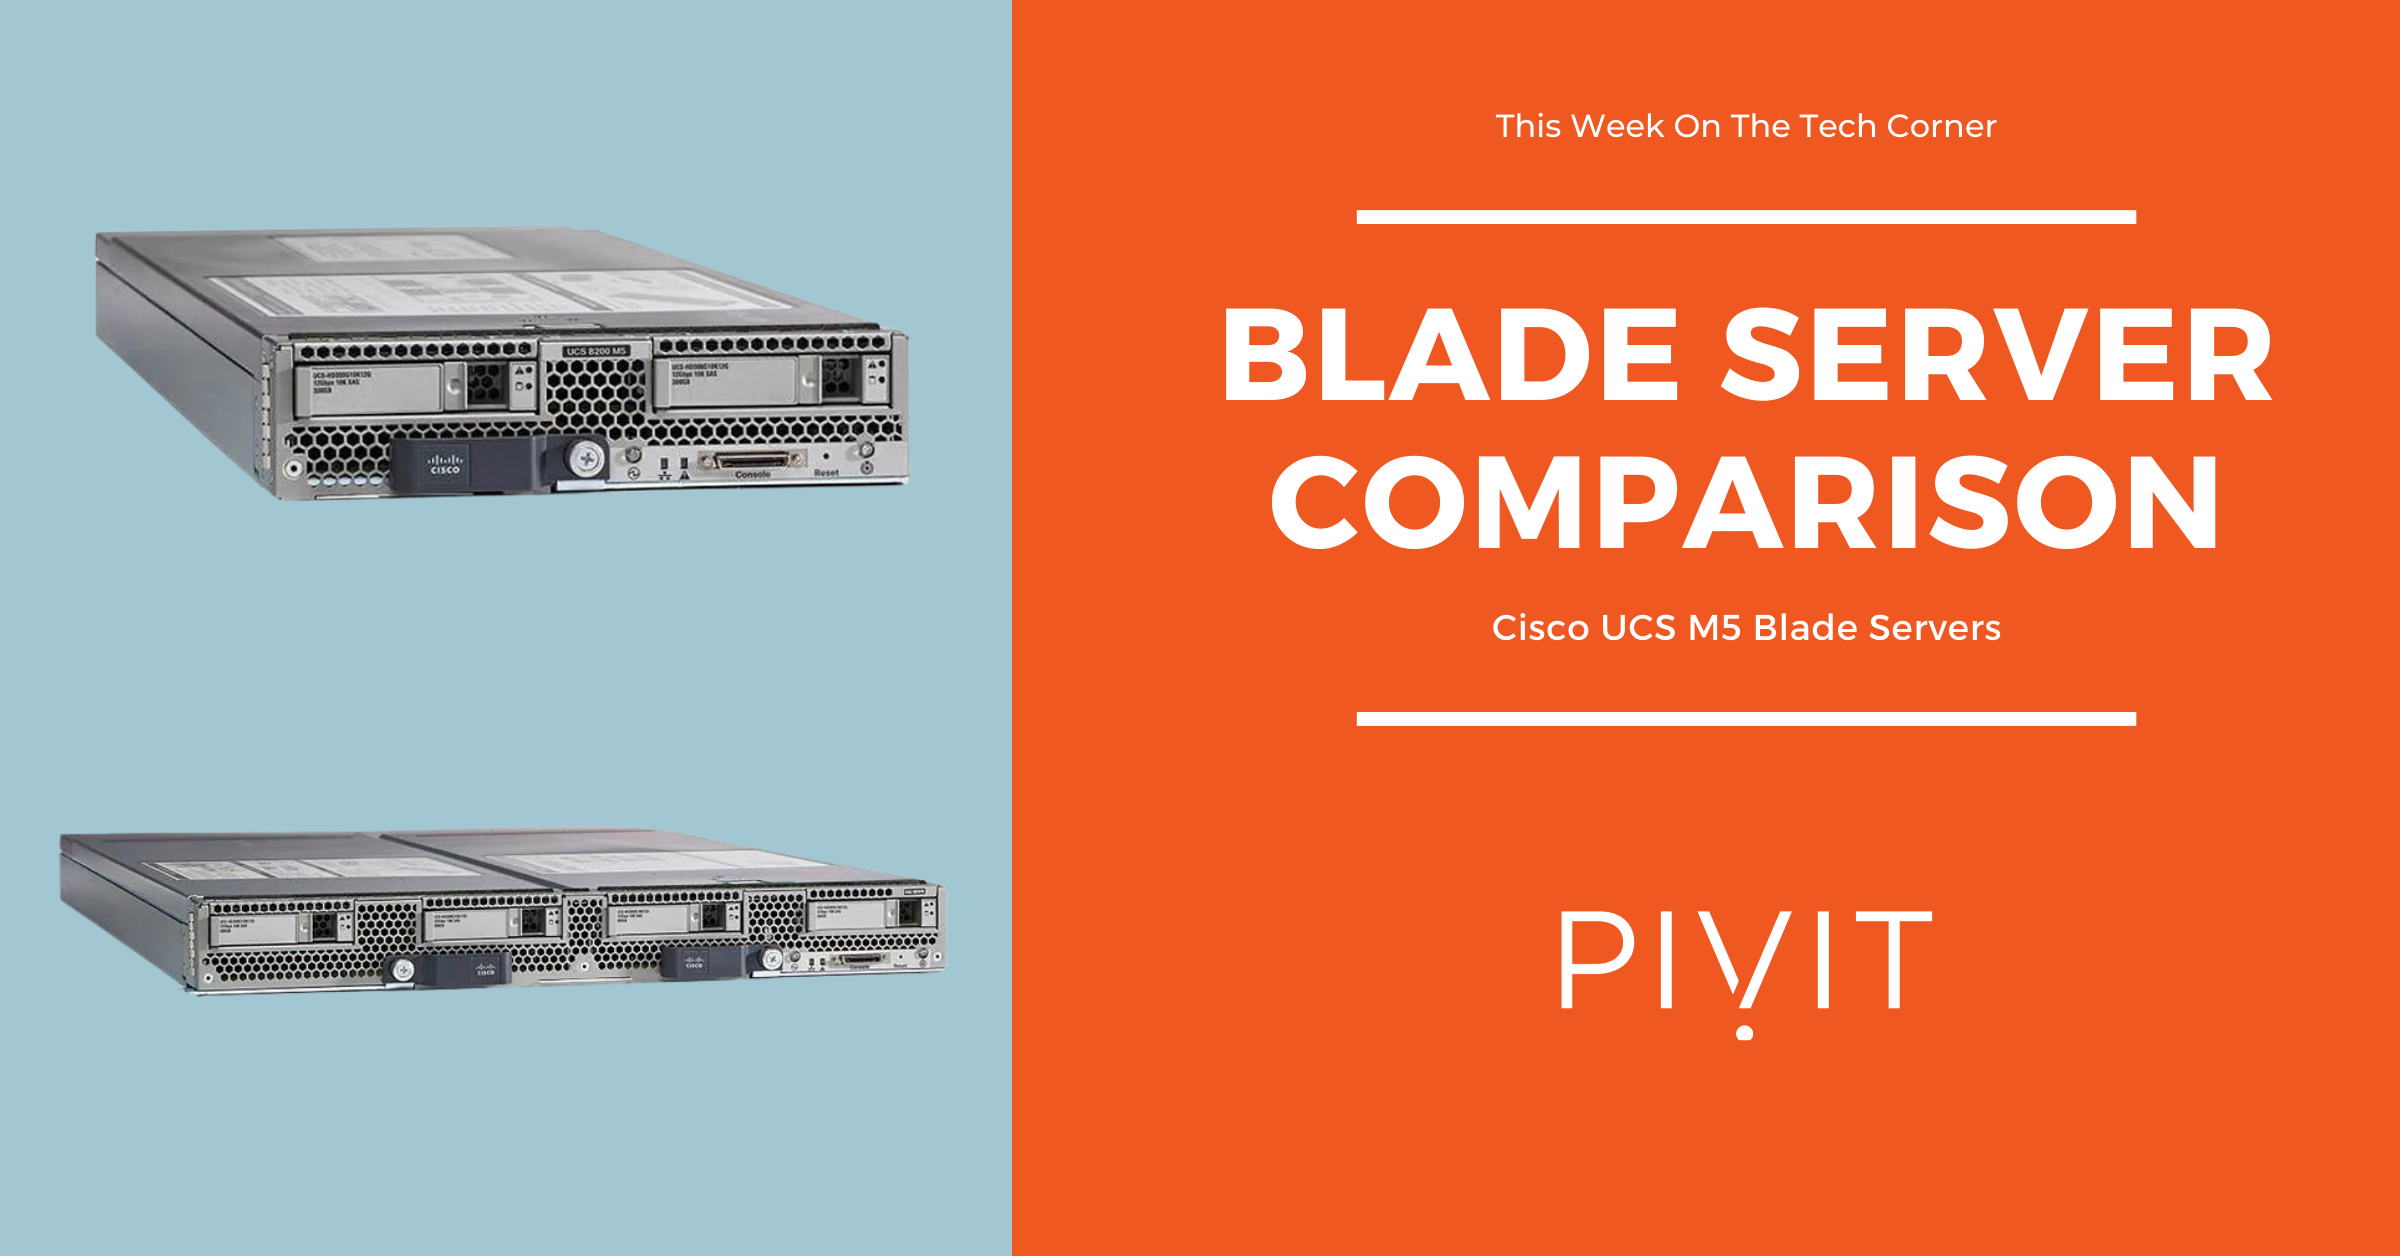 Front cover for blade server comparison article with Cisco M5 B200 and B480 images